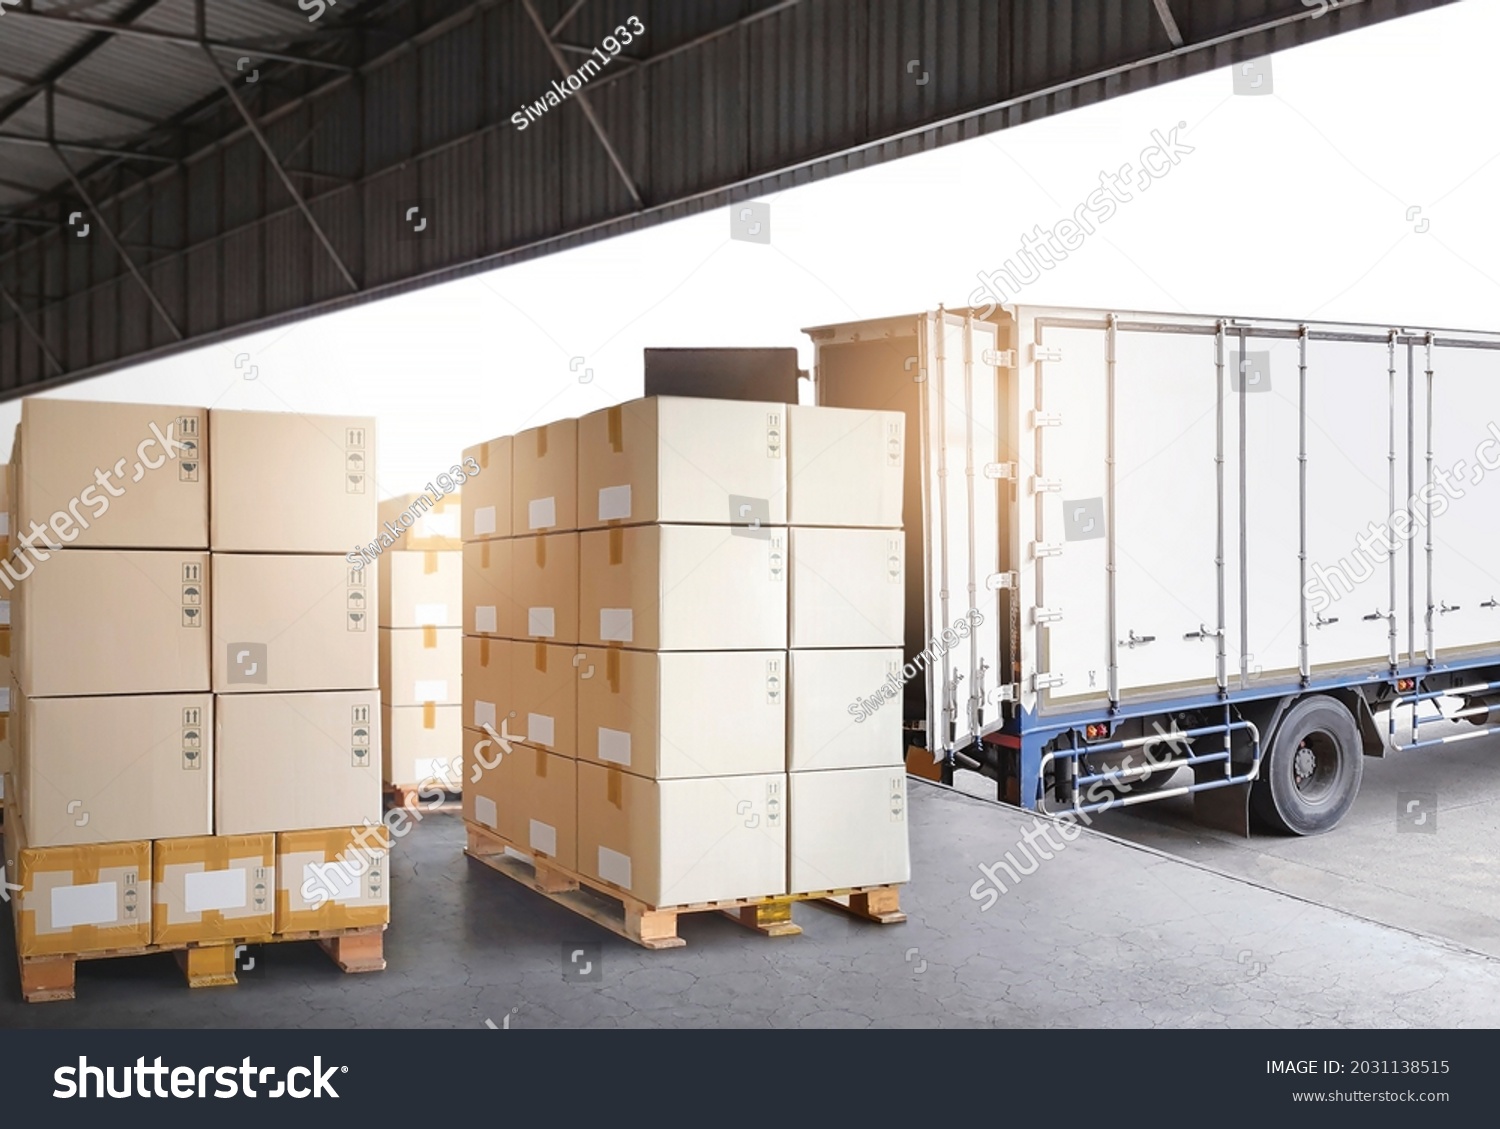 Industry Cargo Freight Trucks Transport Logistics. Shipping Cargo Container Trucks Parked Loading Packagin Boxes at Dock Warehouse. Supply Chain. Distribution Warehouse Center. Shipment Boxes. #2031138515